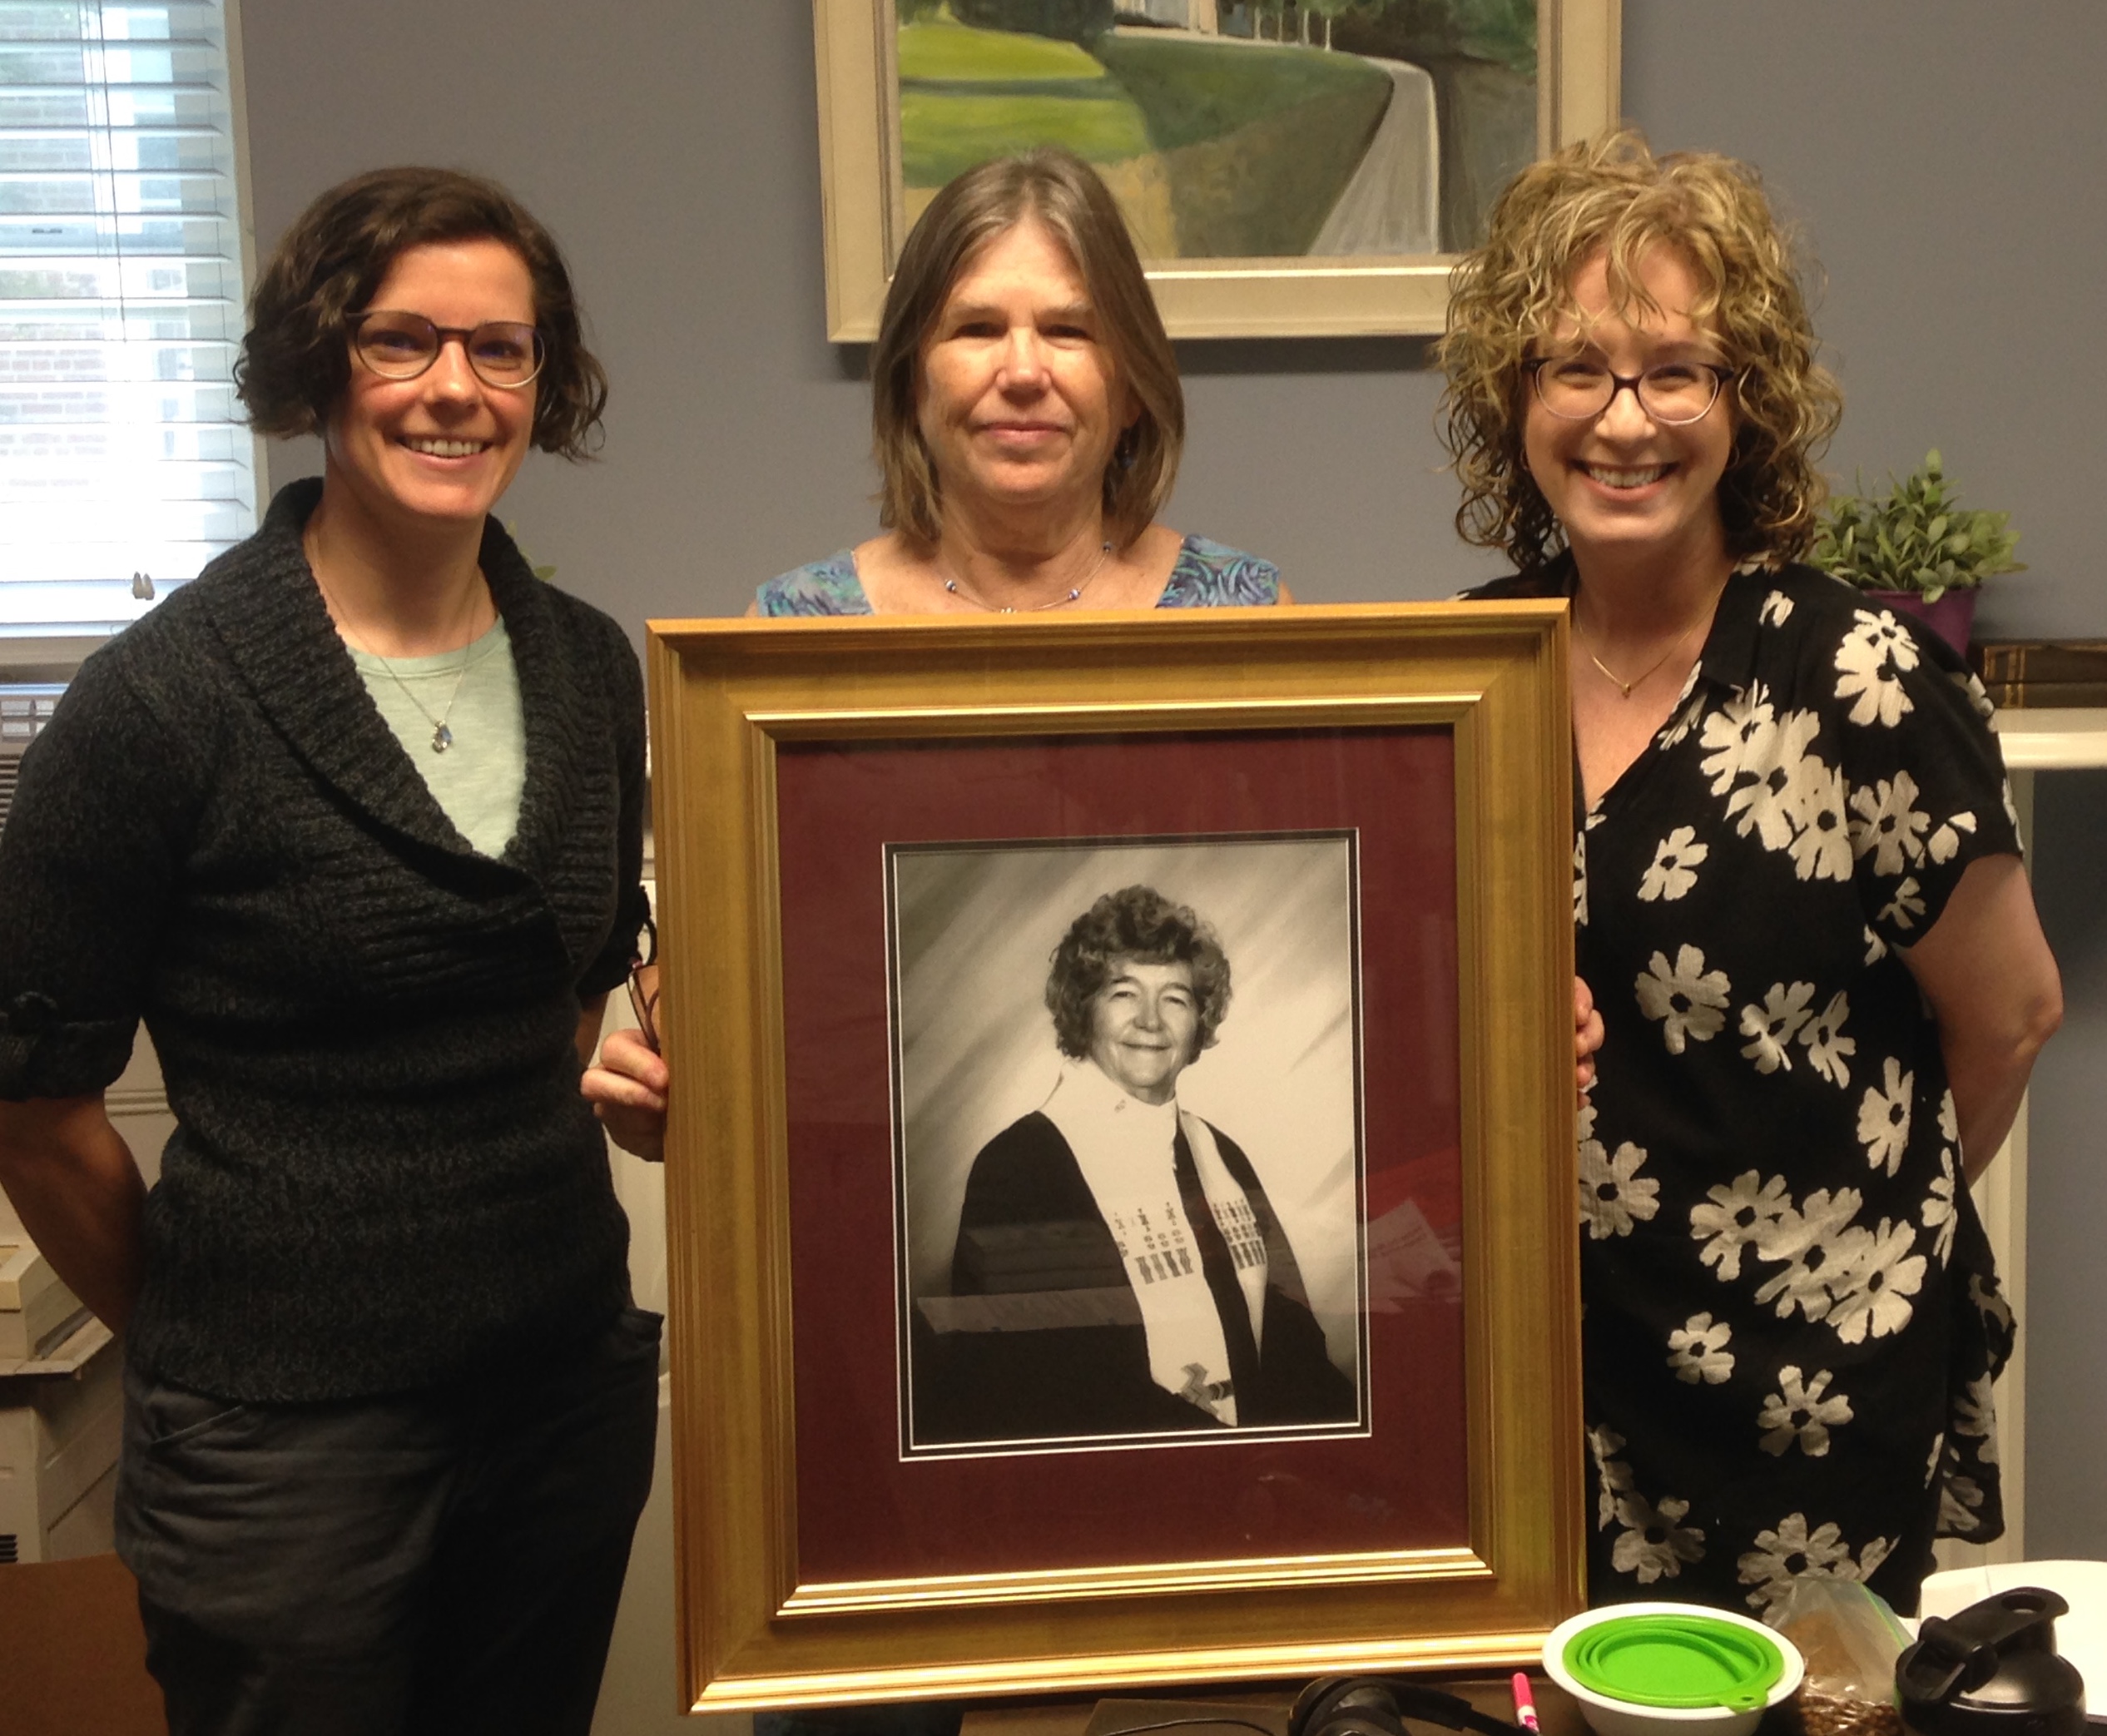 Pictured above: Photo of Rev. Joyce Stedge held by Debbie Stedge, standing with Rev. Amy Nyland and Rev. Julia Doellman-Brown